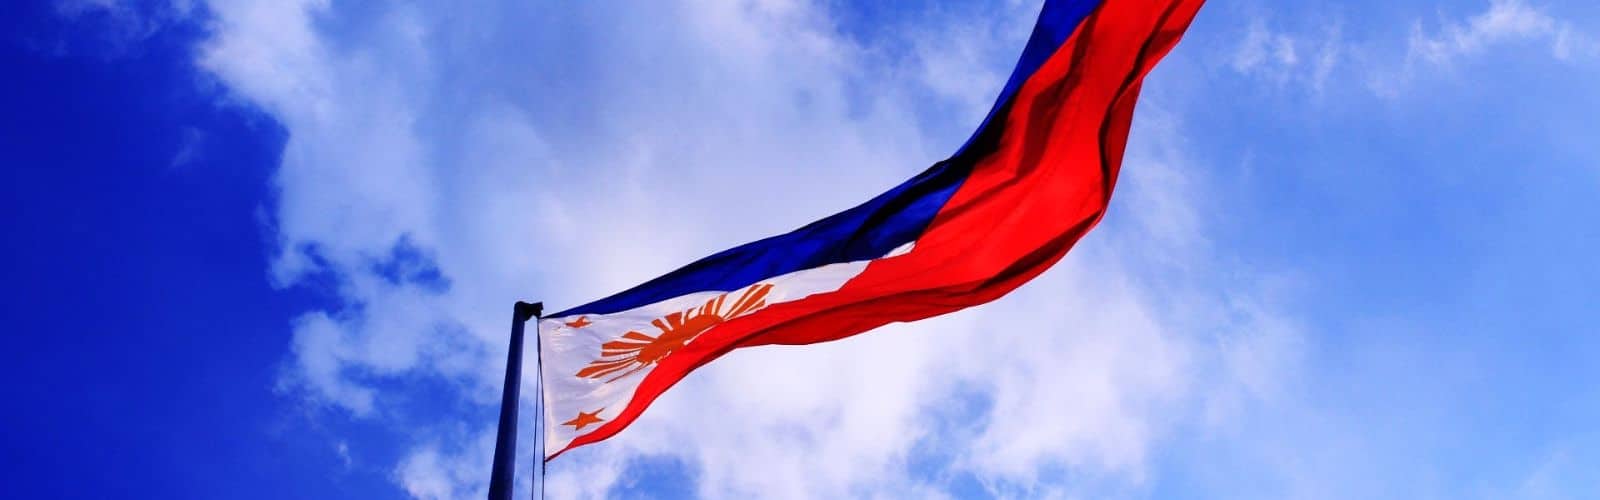 10 Reasons to Do an Internship in the Philippines